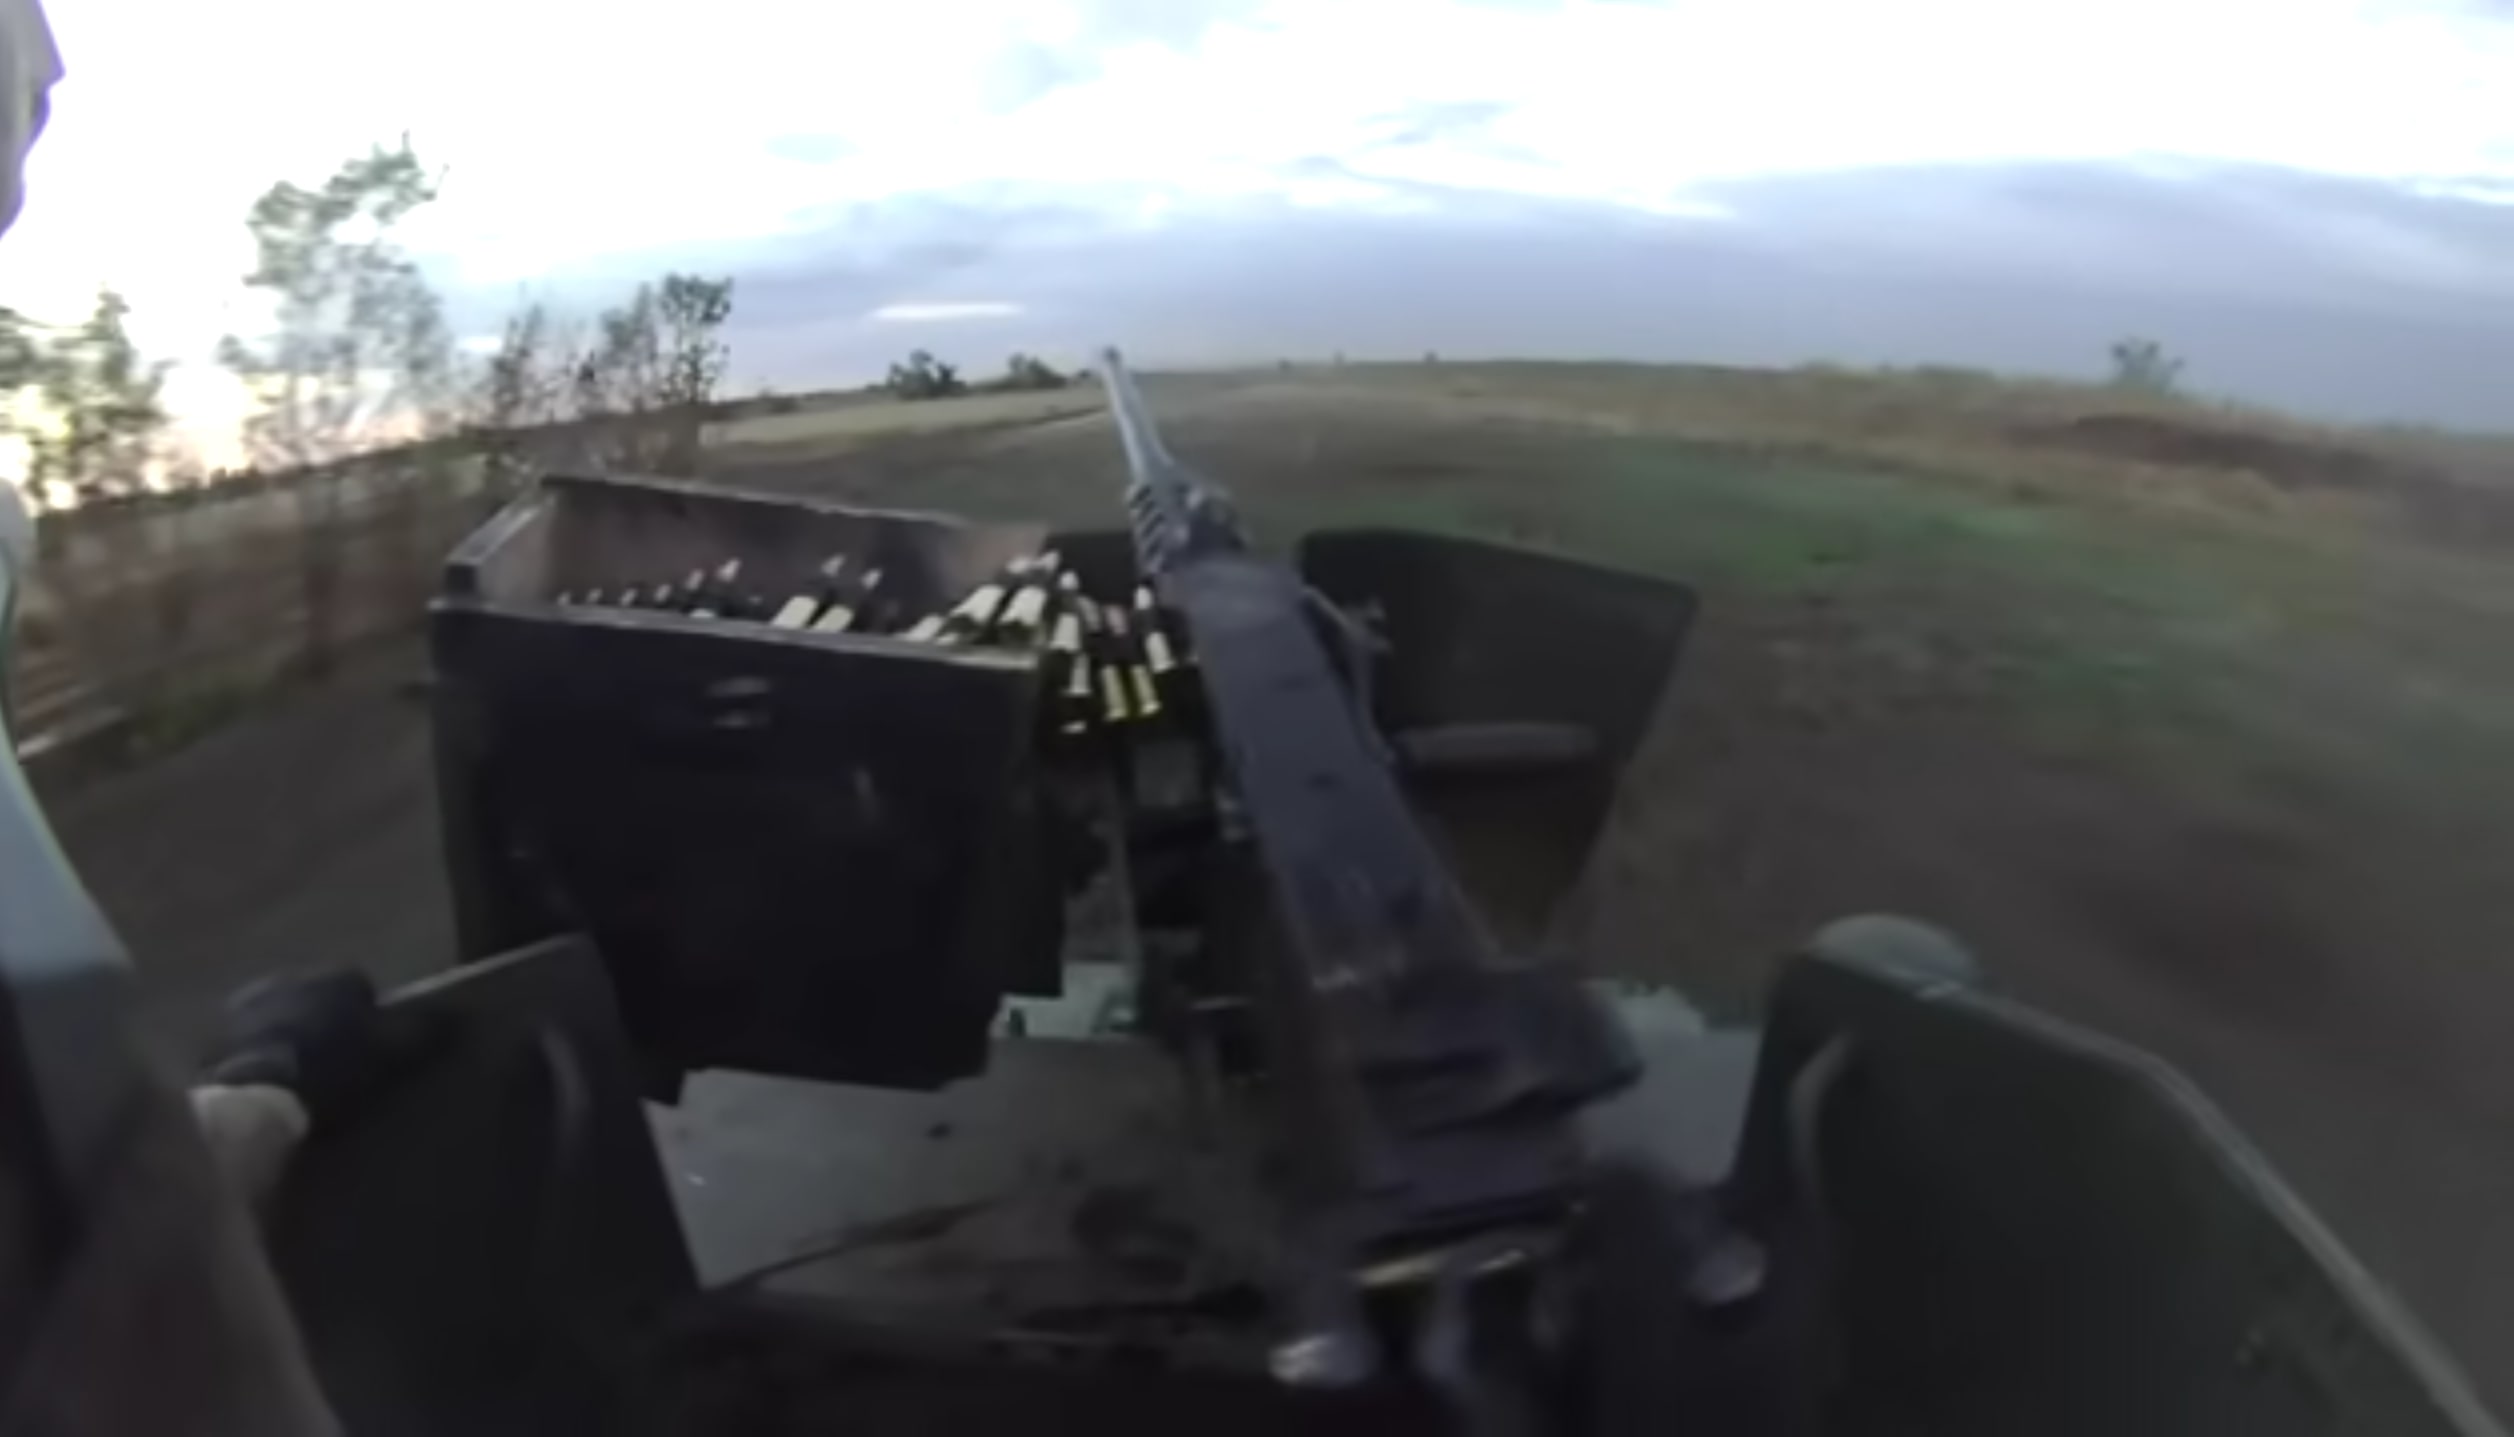 In the video, a soldier with an American accent shoots at what is described "Russians in occupied village."